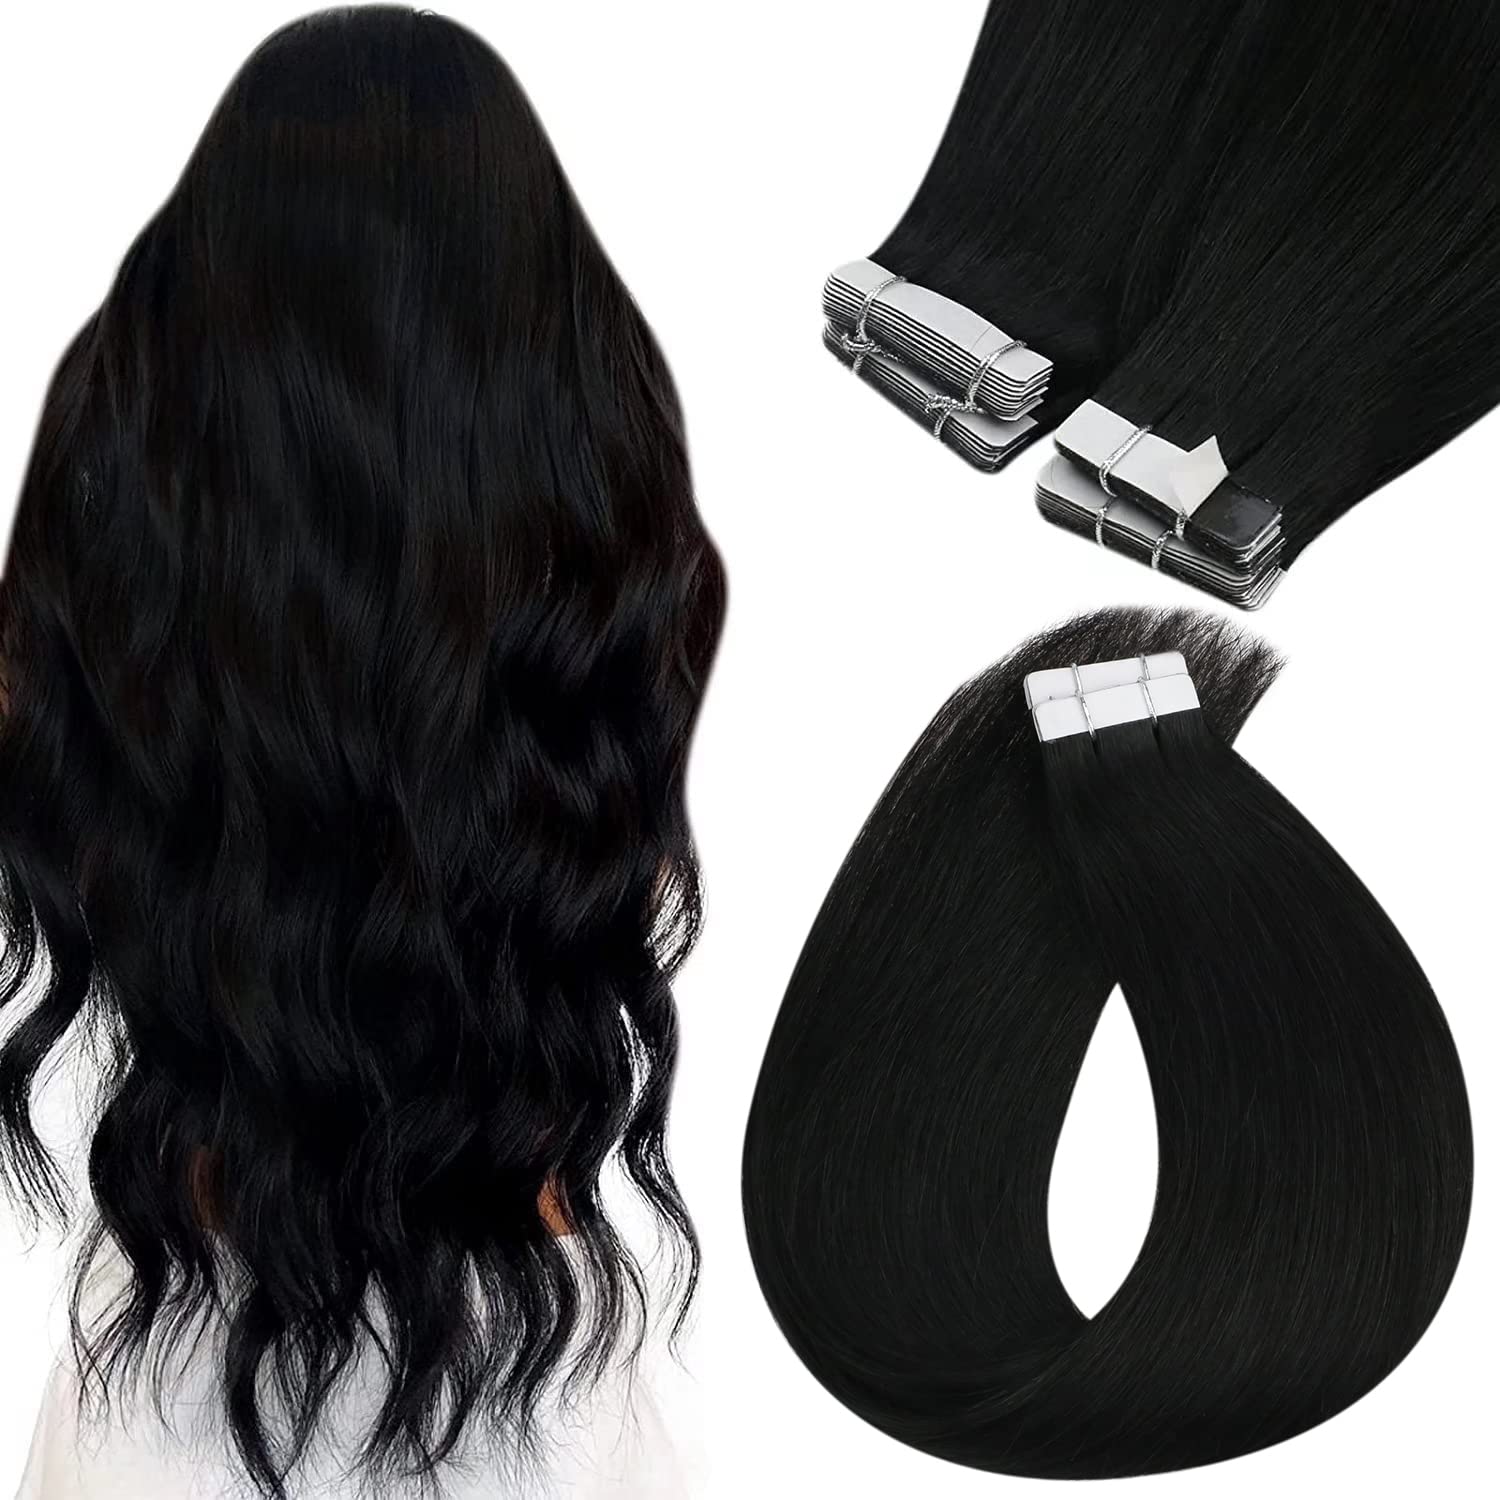 Sunny Hair Sunny Tape In Extensions Human Hair Black Tape In Human Hair Extensions Jet Black Tape On Hair Extensions Black Human Hair Exten